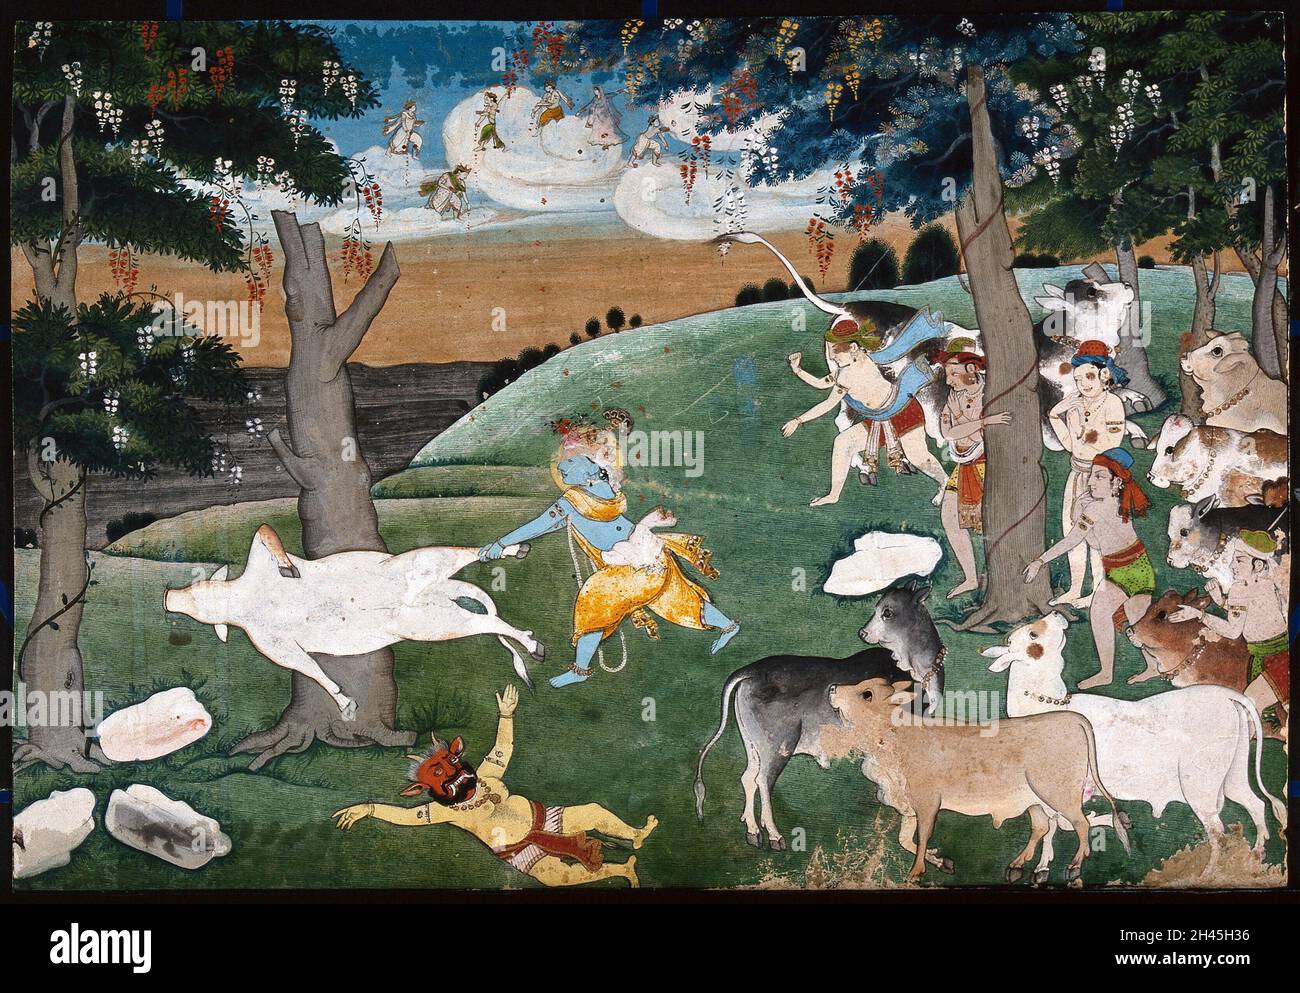 Krishna slaying a demon with the aid of a cow, is watched by several cowherds with Indian deities in the distance. Gouache painting, ca. 1800. Stock Photo